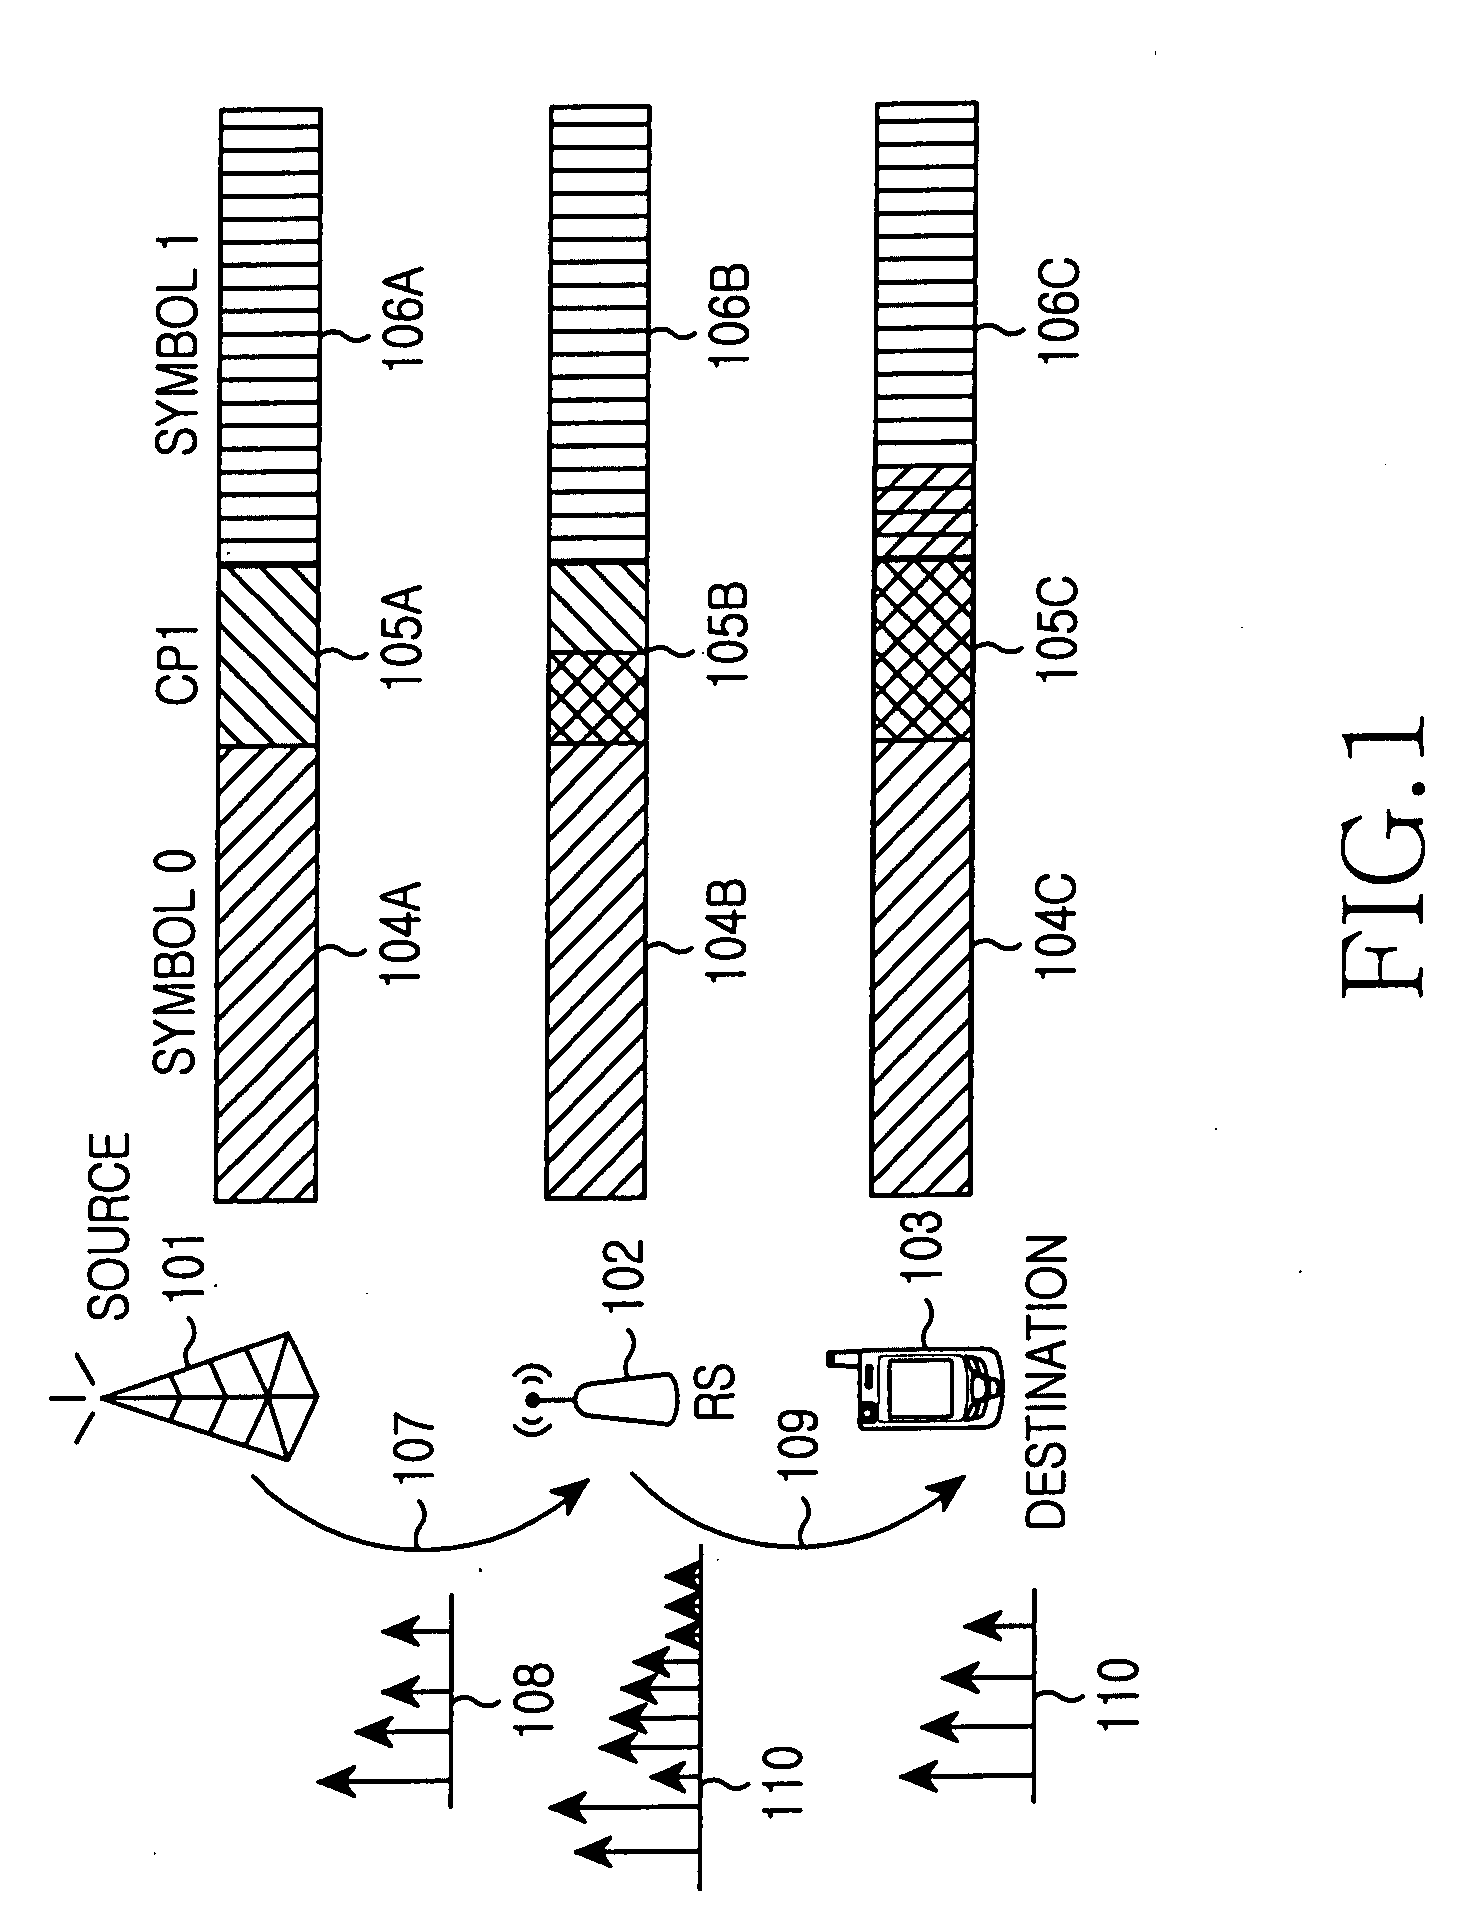 Apparatus and method for providing relay service in an OFDM mobile communication system